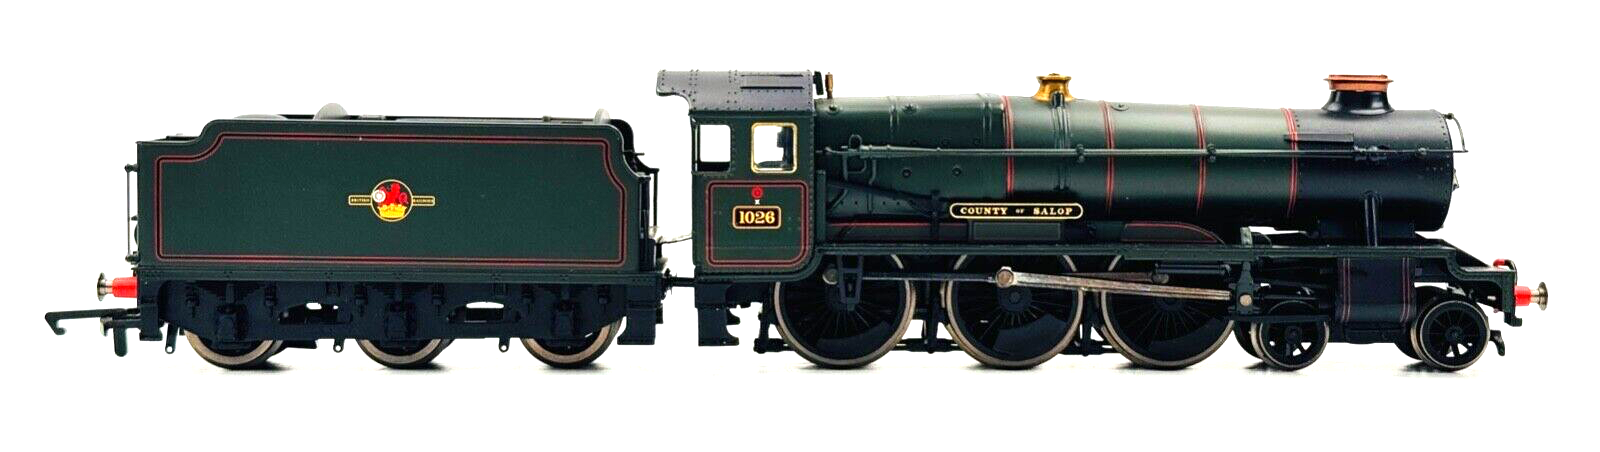 HORNBY 00 GAUGE - R2392 - BR 4-6-0 COUNTY CLASS 1026 'COUNTY OF SALOP' BOXED